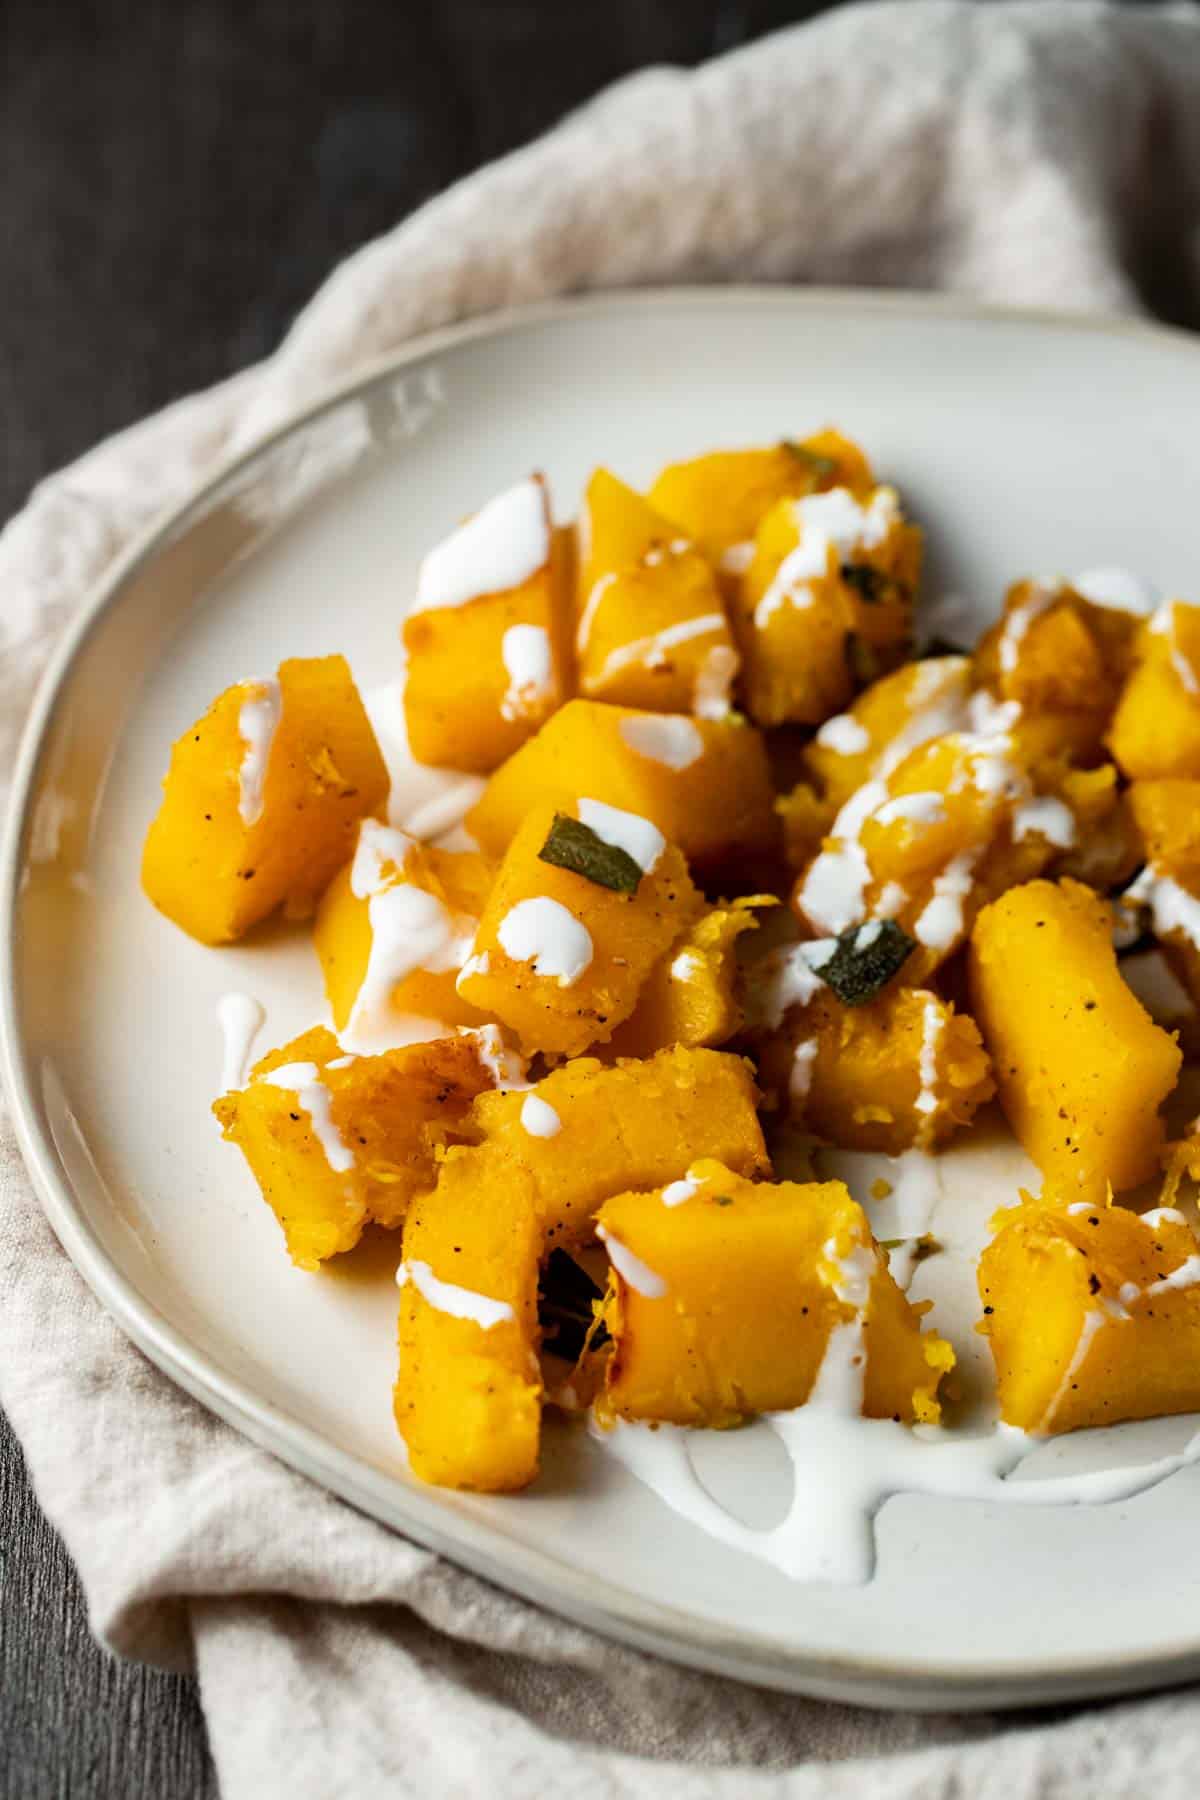 Cooked pumpkin cubes on a plate, drizzled with crème fraiche.